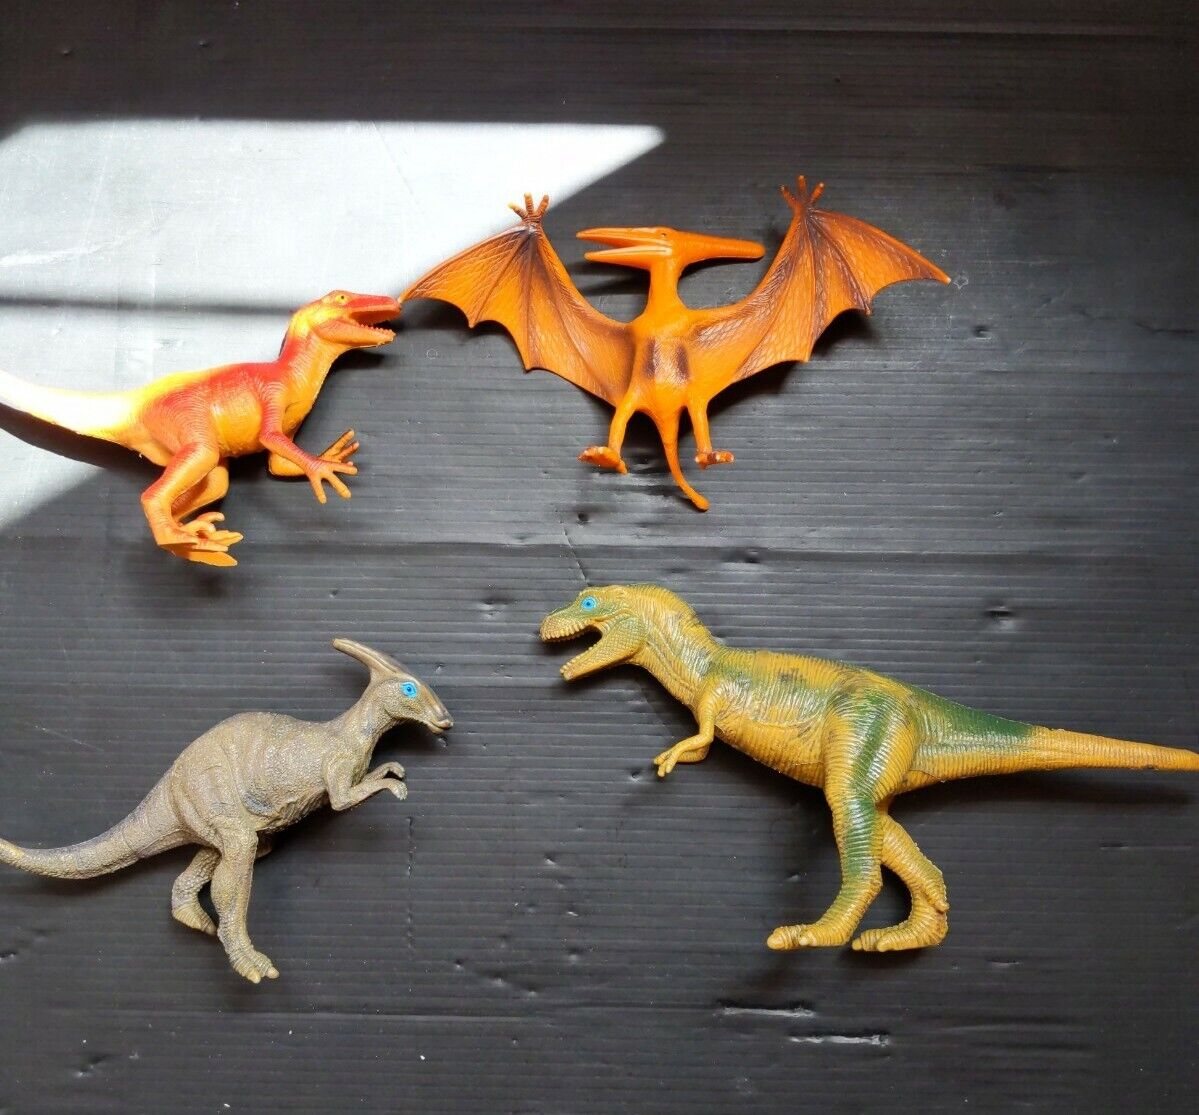 Lot of 4 Dinosaur Figures assorted sizes and species Made In China. B9